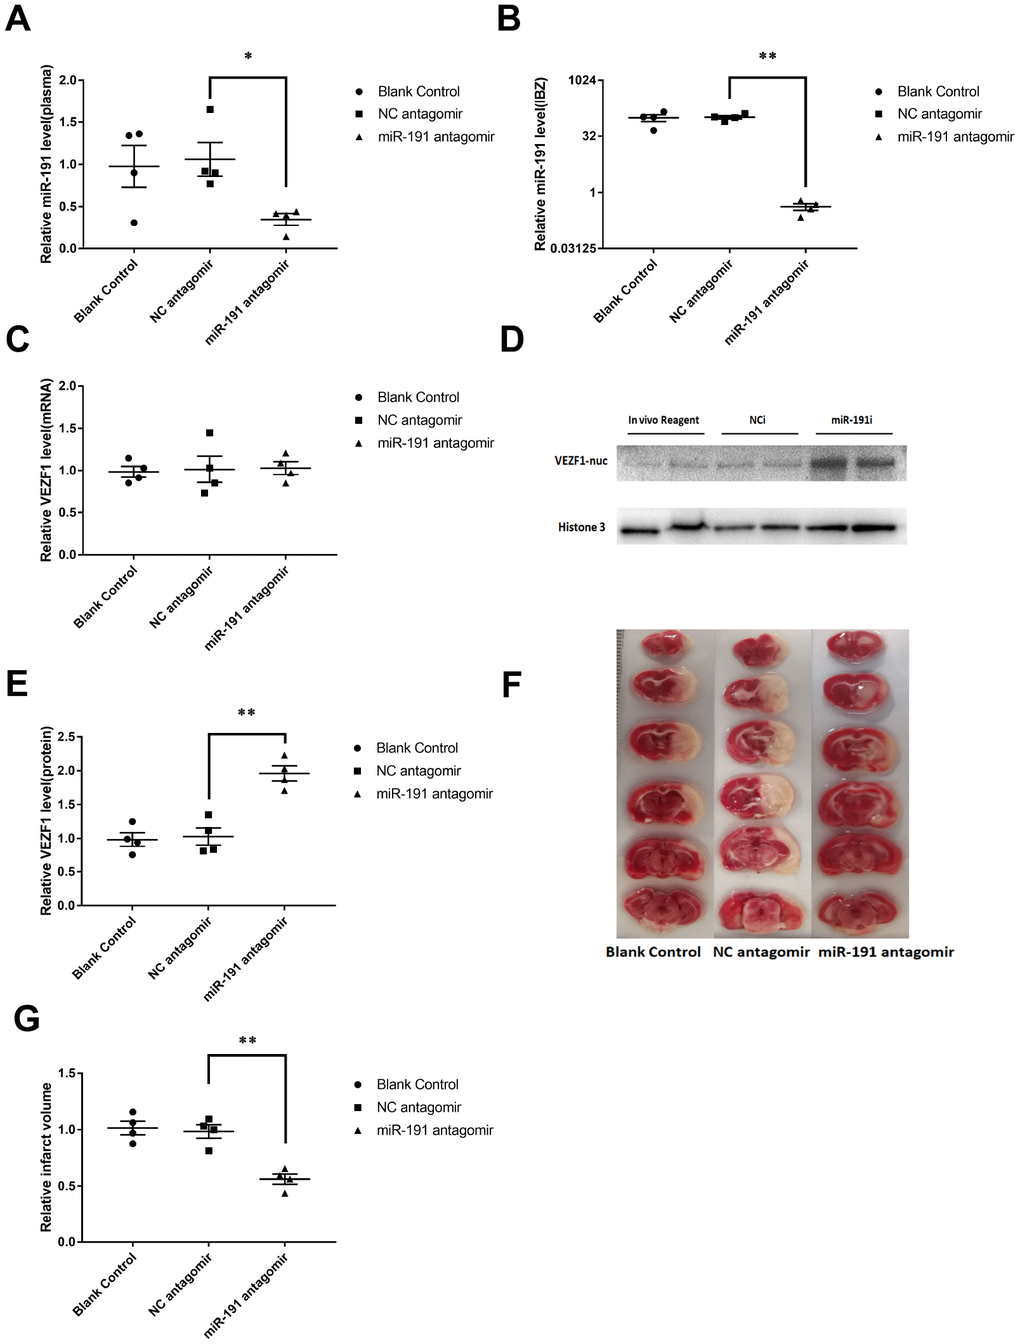 Inhibition of miR-191 reduced infarction volume of MCAO rats after the injection of miR-191 antagomir compared to NC antagomir and blank control. Relative miR-191 levels in (A) plasma and (B) IBZ (n =4 per group); (C) Real-time PCR analysis of VEZF1 expression in IBZ (n =4 per group); (D, E) Western blot analysis of VEZF1 expression in IBZ (n =4 per group); (F, G) Relative infarct volume of MCAO rats (n =4 per group). Means ± SEM. * P